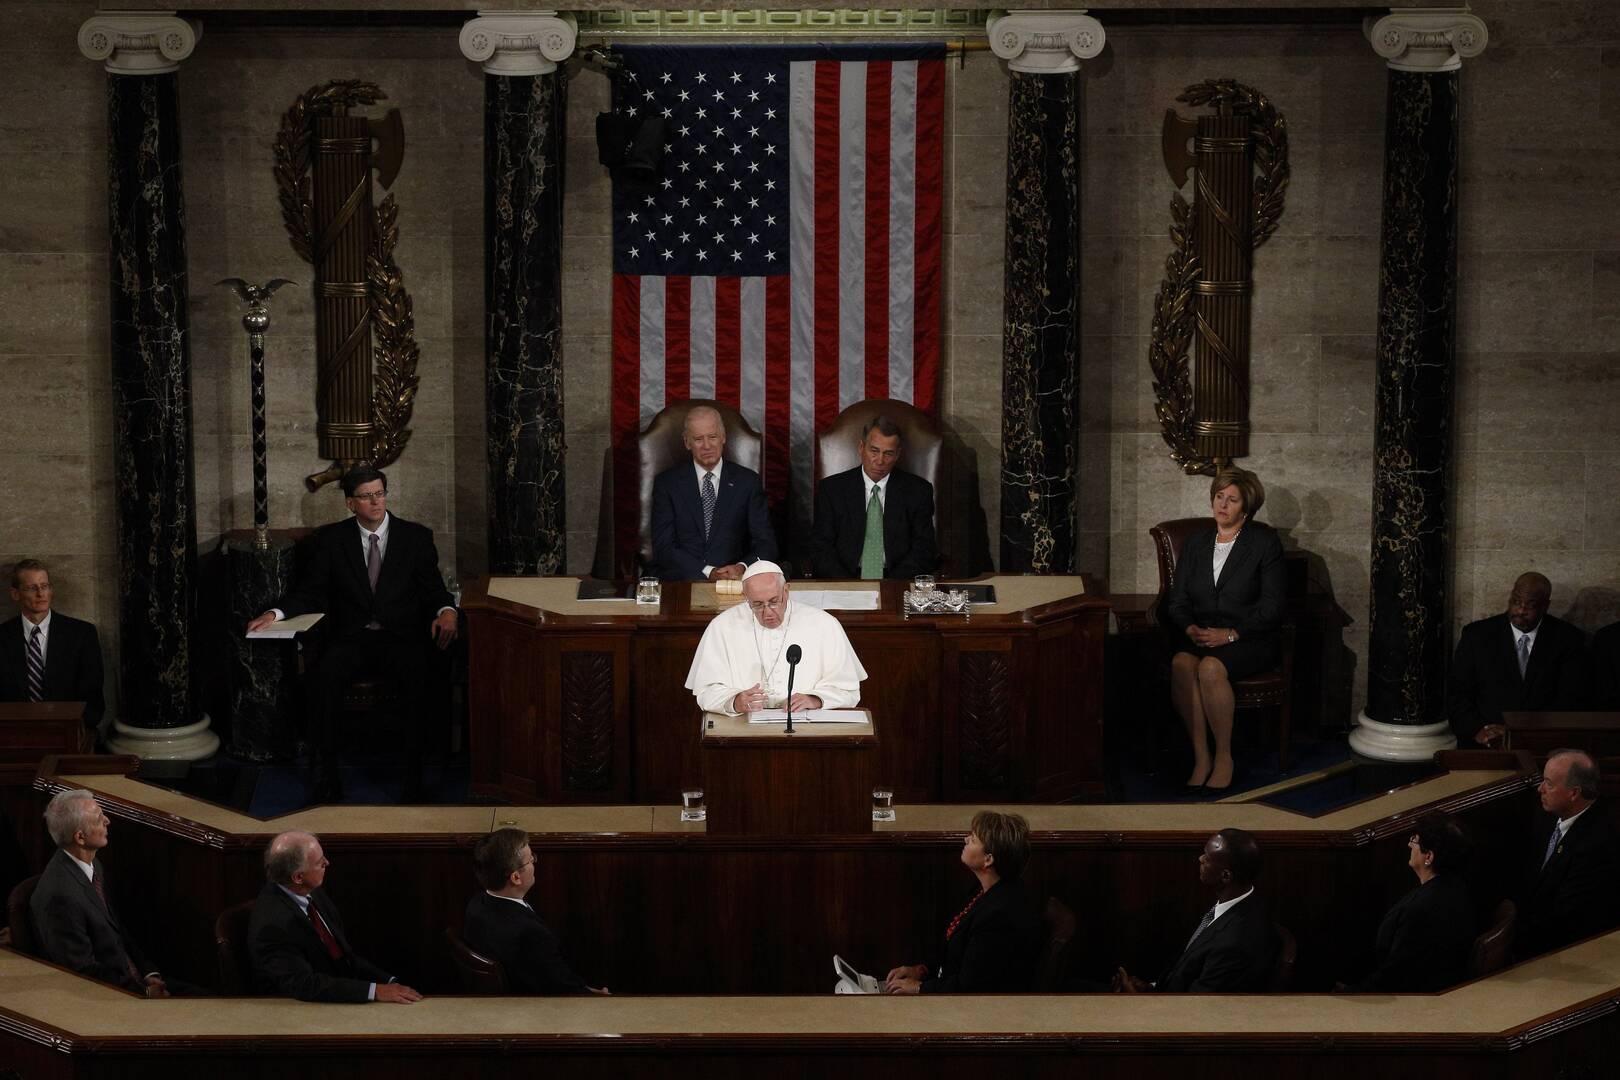 Pope Francis speaks in front of the president and other members of the us congress